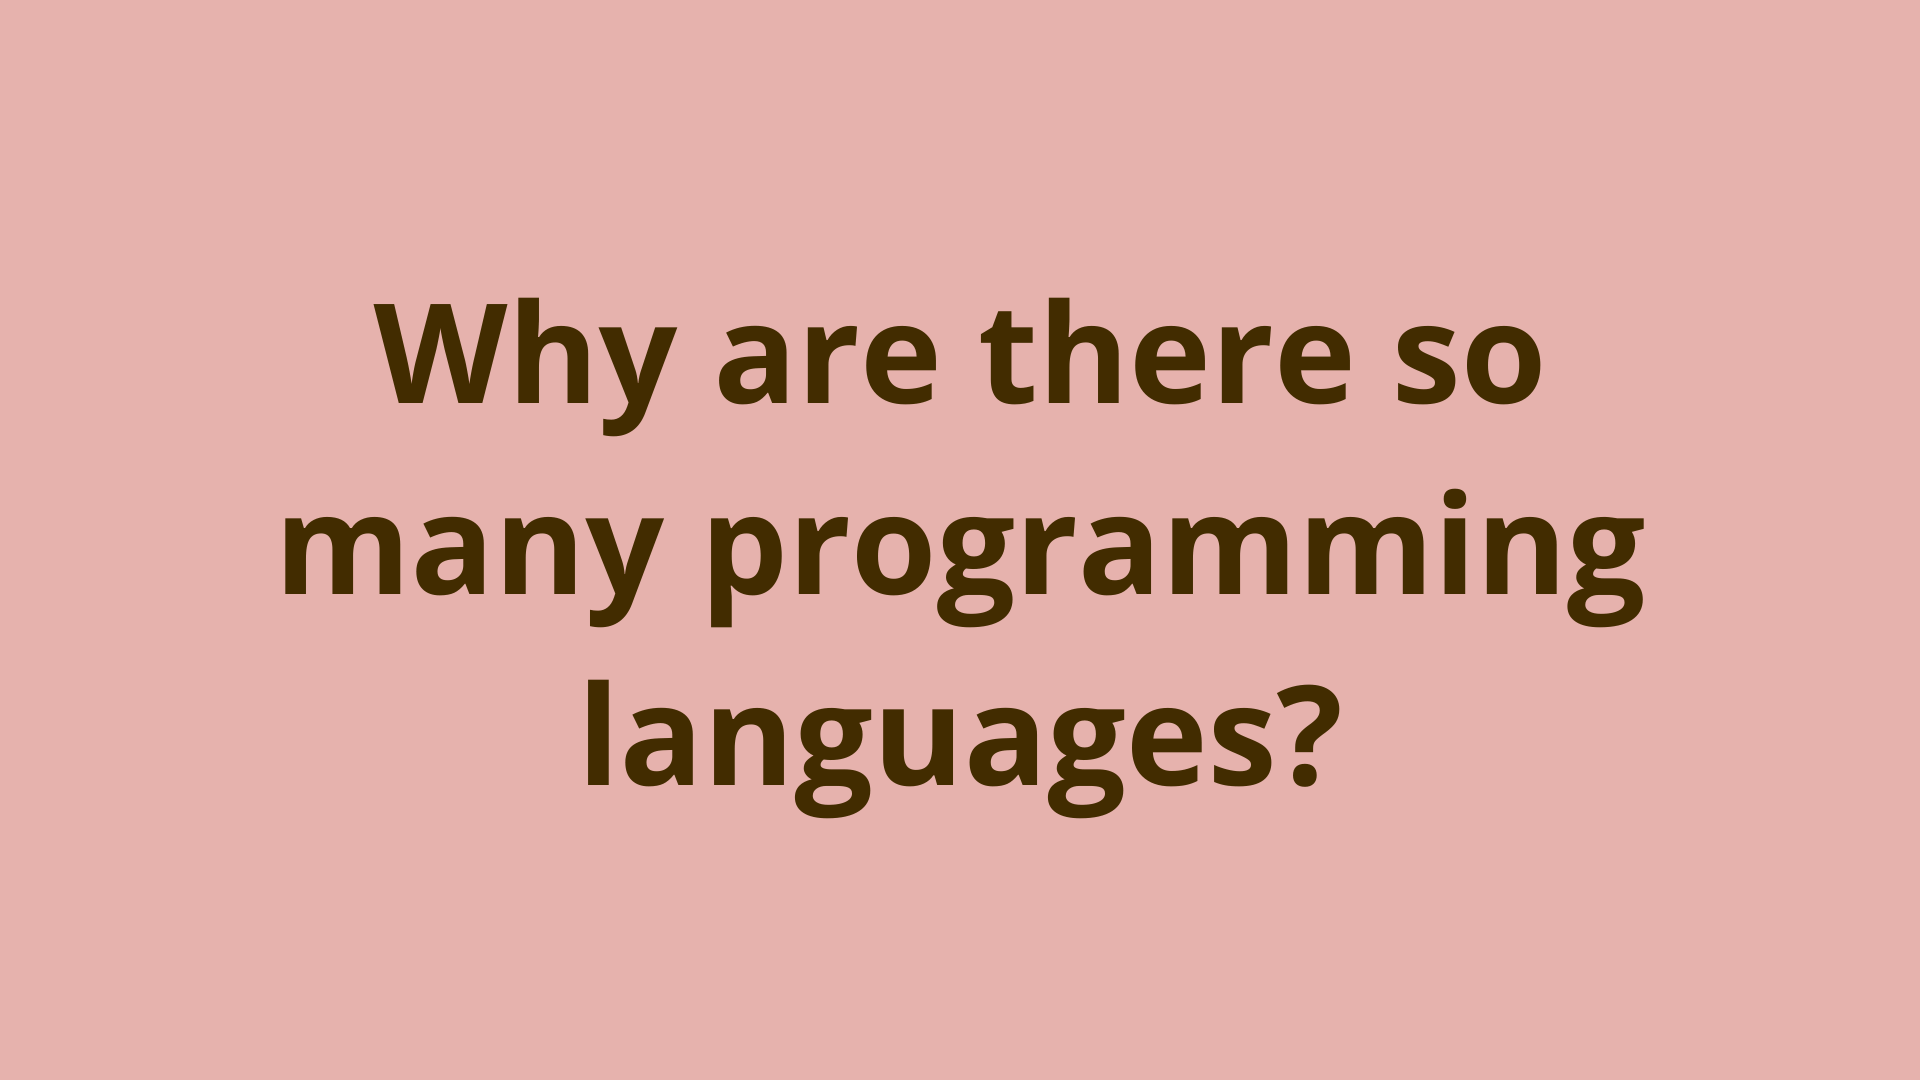 Image of Why are there so many programming languages?